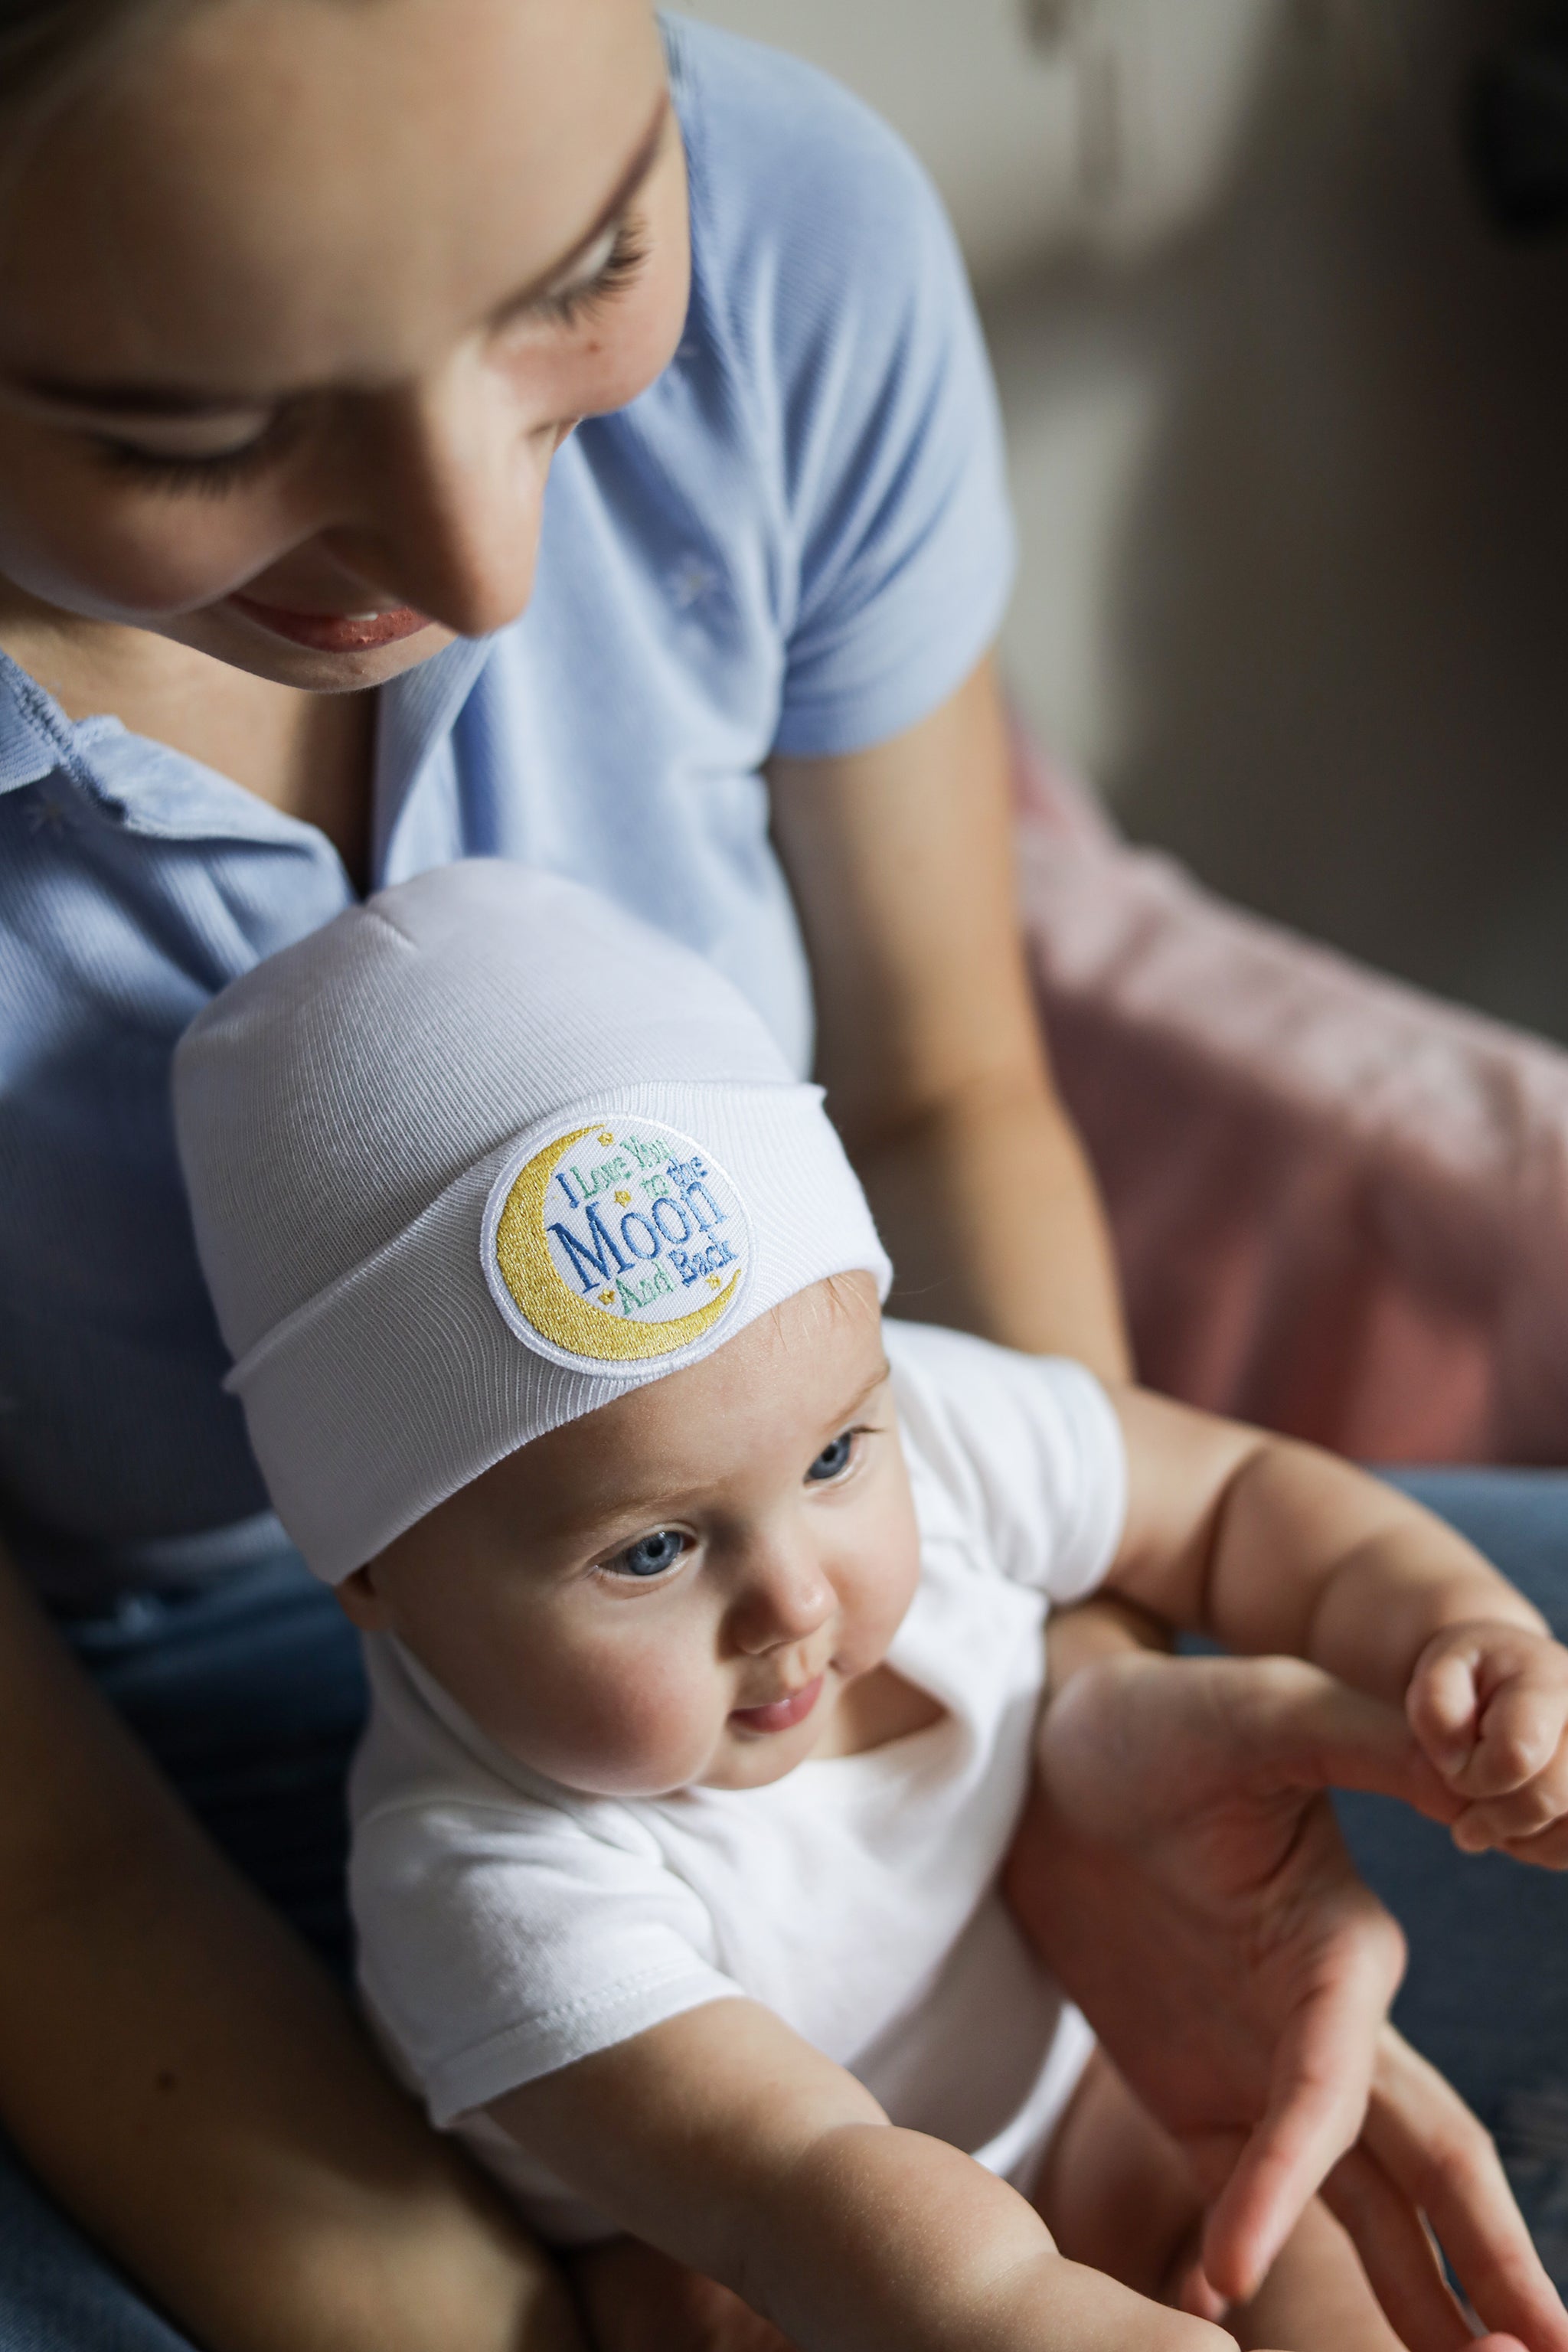 I Love you to the Moon Newborn Boy and Girl - Gender Neutral Hospital Hat - White Hospital Hat Newborn Boy or Girl- I love you to the moon